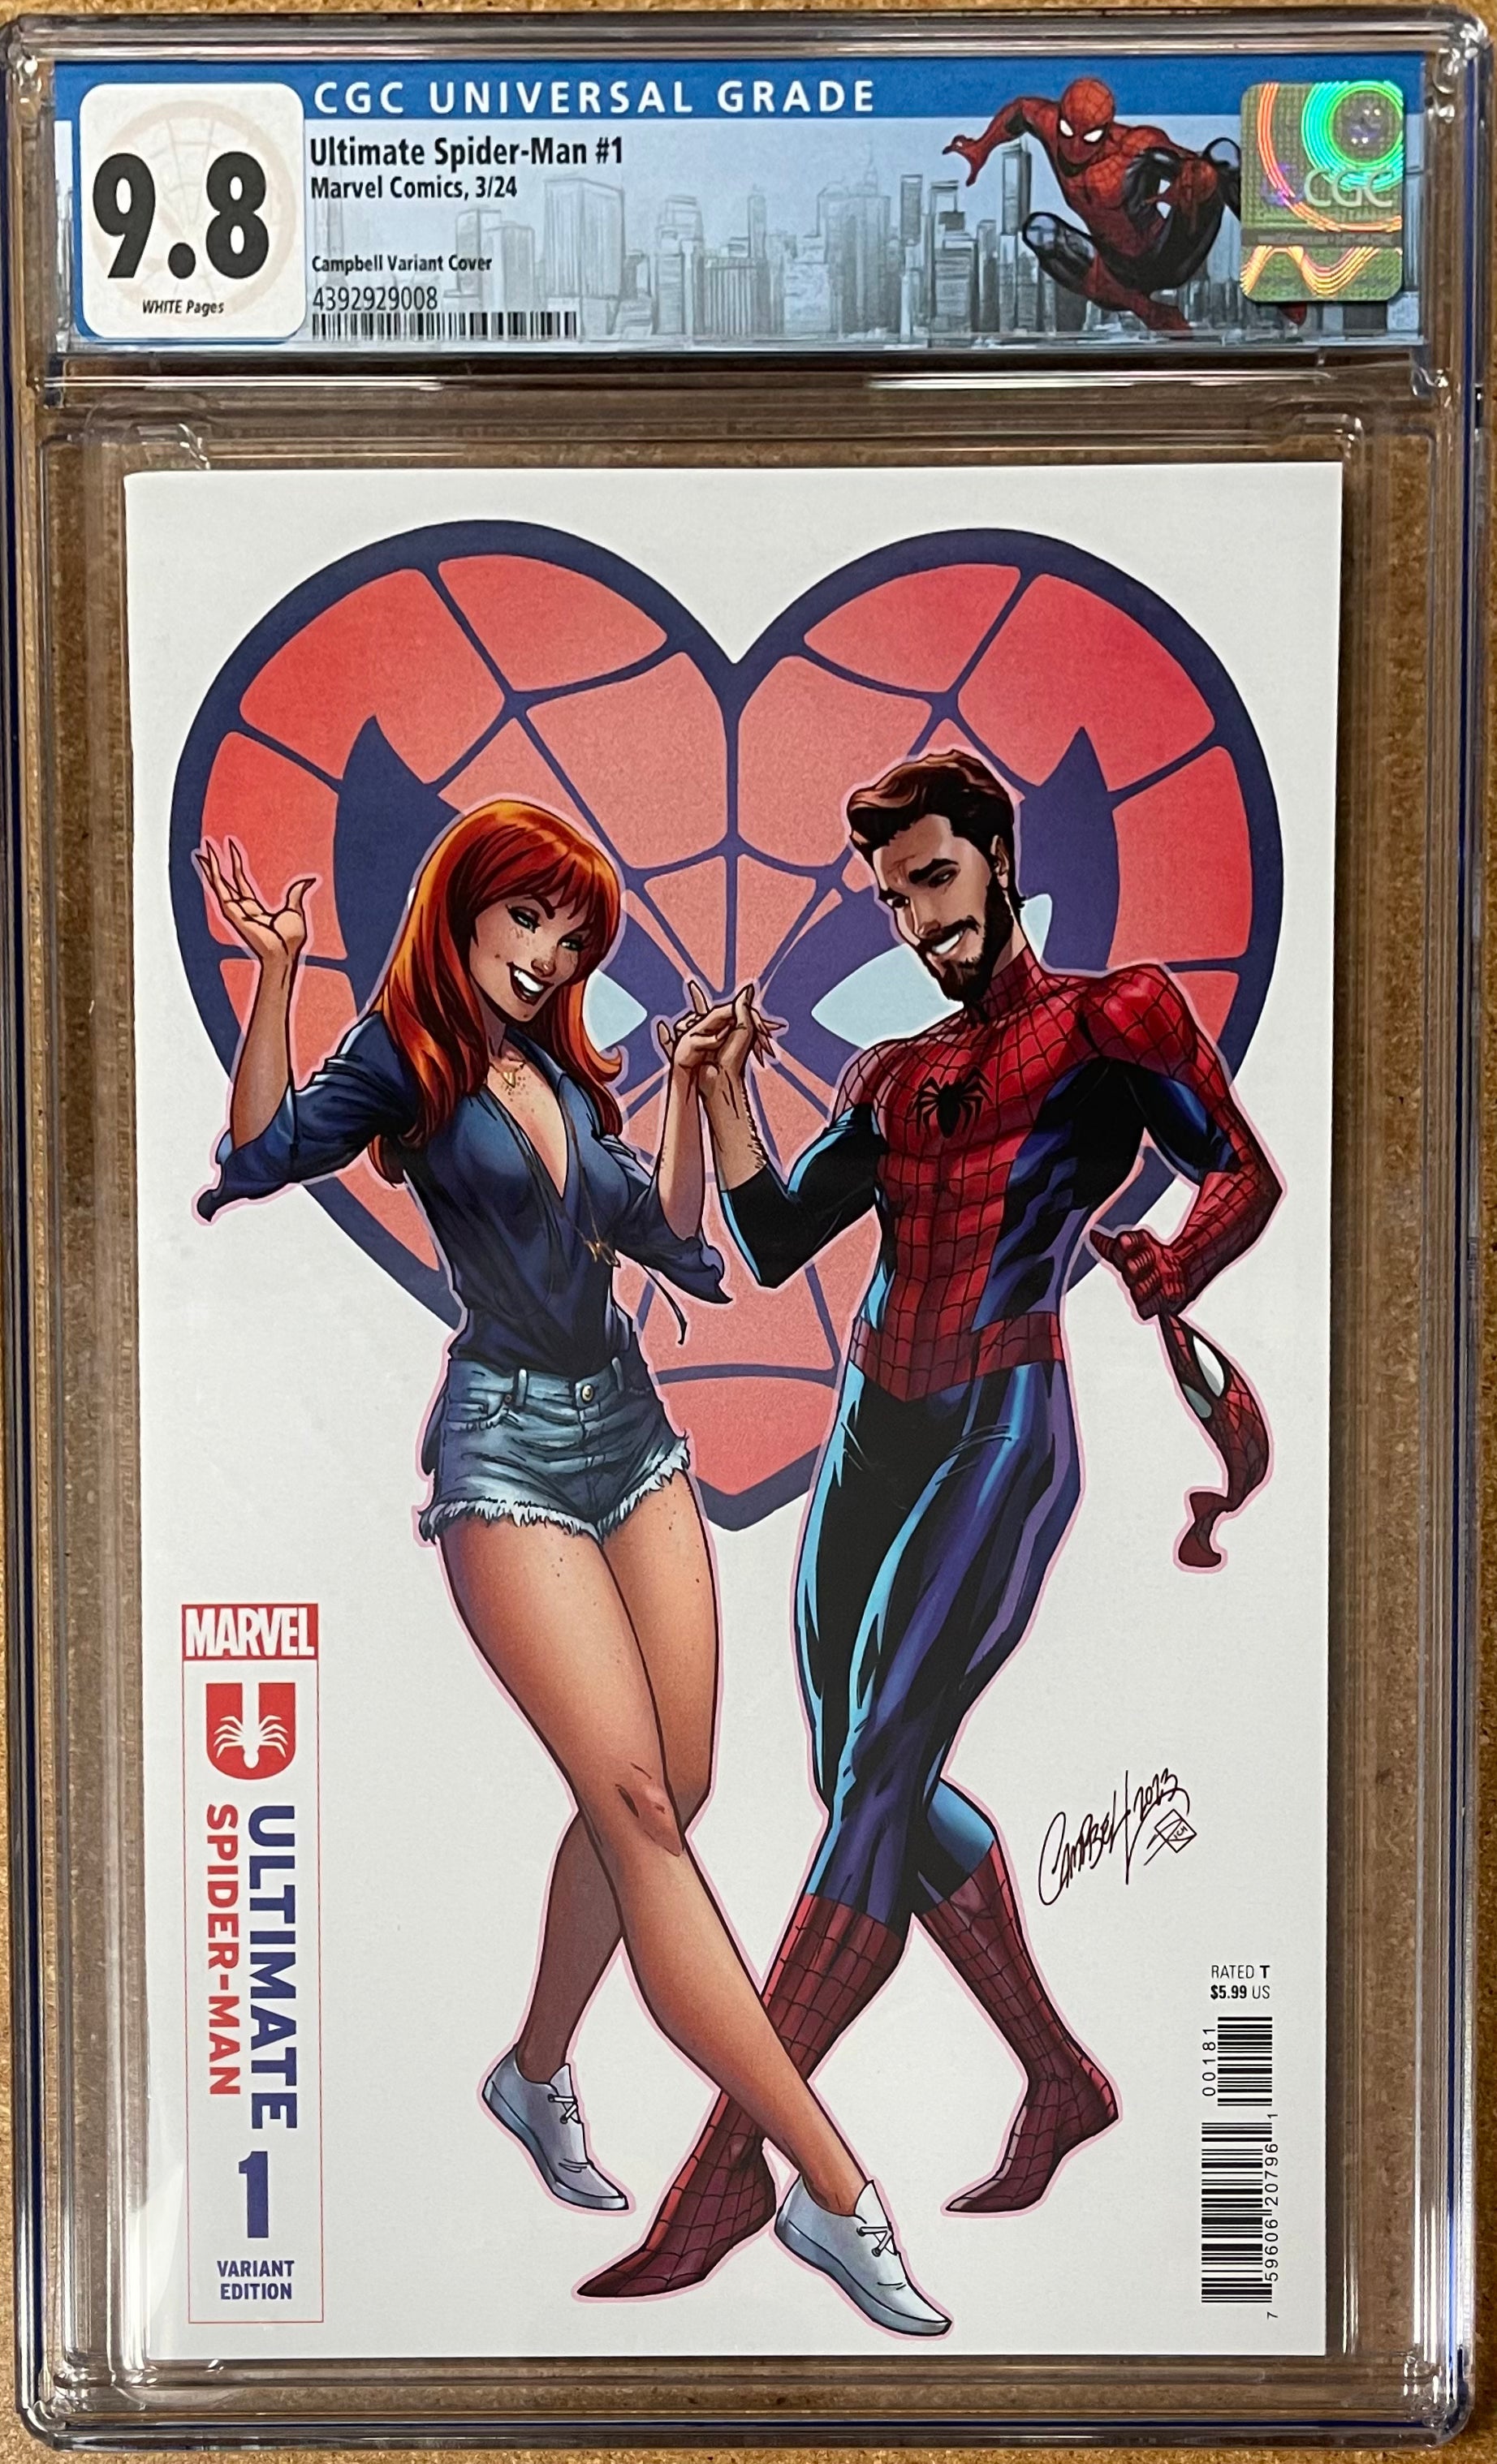 ULTIMATE SPIDER-MAN #1 CAMPBELL VARIANT CGC 9.8 W/SPIDER-MAN NY CUSTOM LABEL